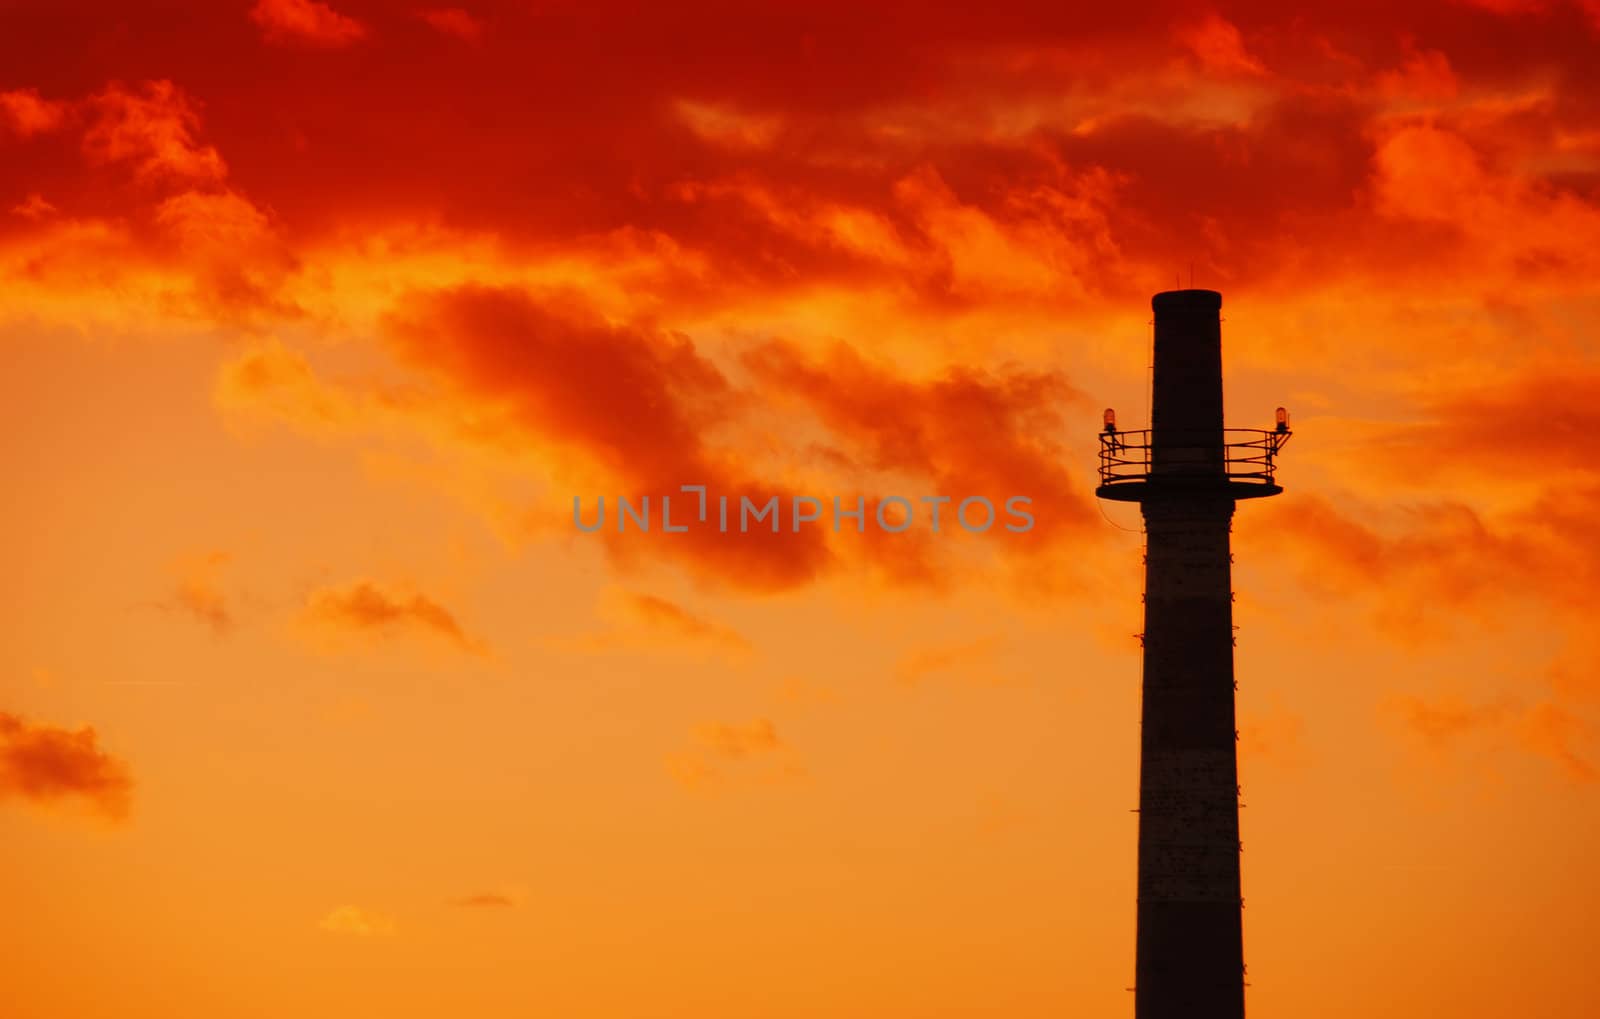 Old industrial chimney sihouette at beautiful warm sunset